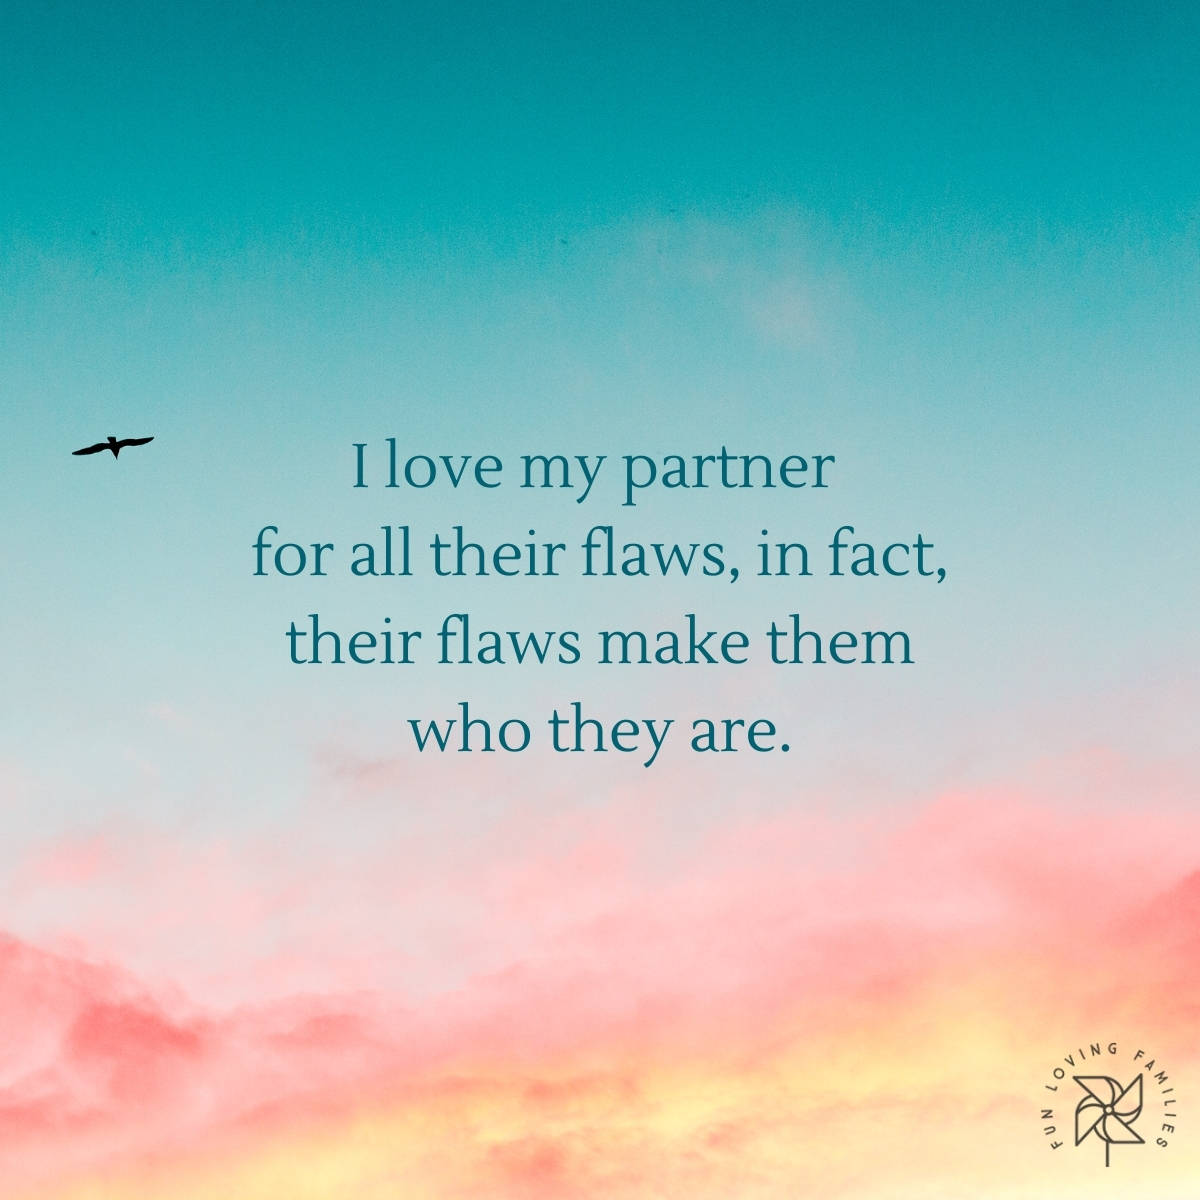 I love my partner for all their flaws affirmation image